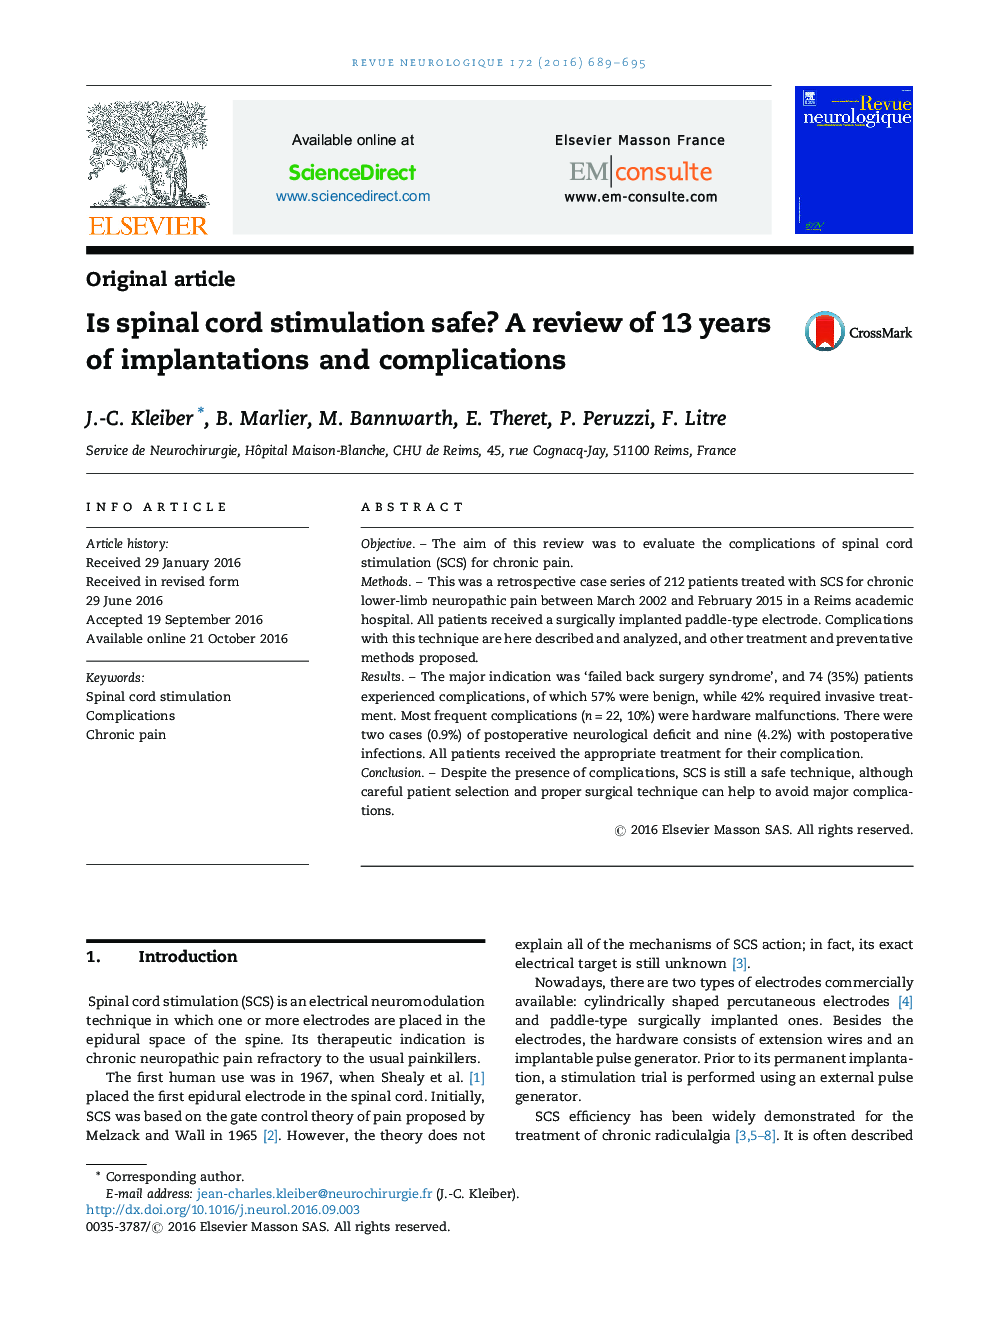 Original articleIs spinal cord stimulation safe? A review of 13 years of implantations and complications